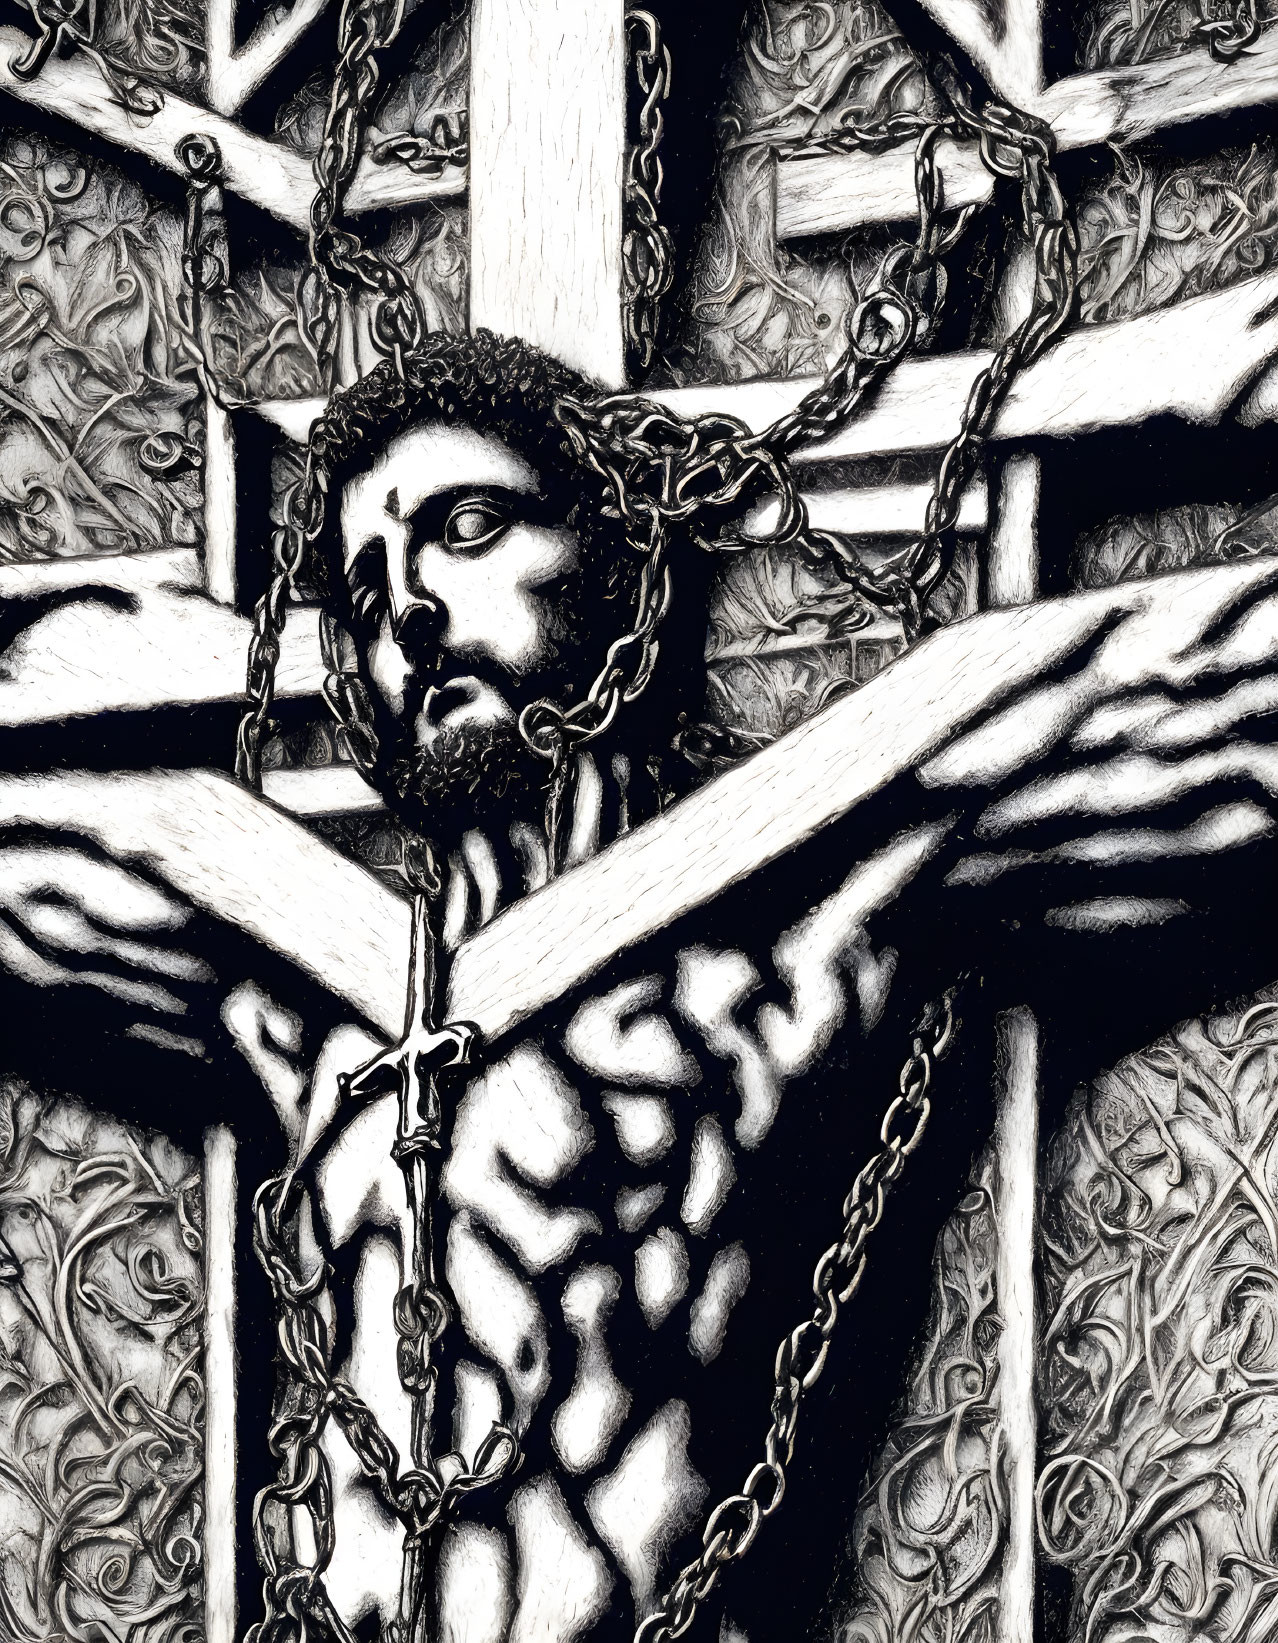 Lutheran Crucifix with Chain wallpaper